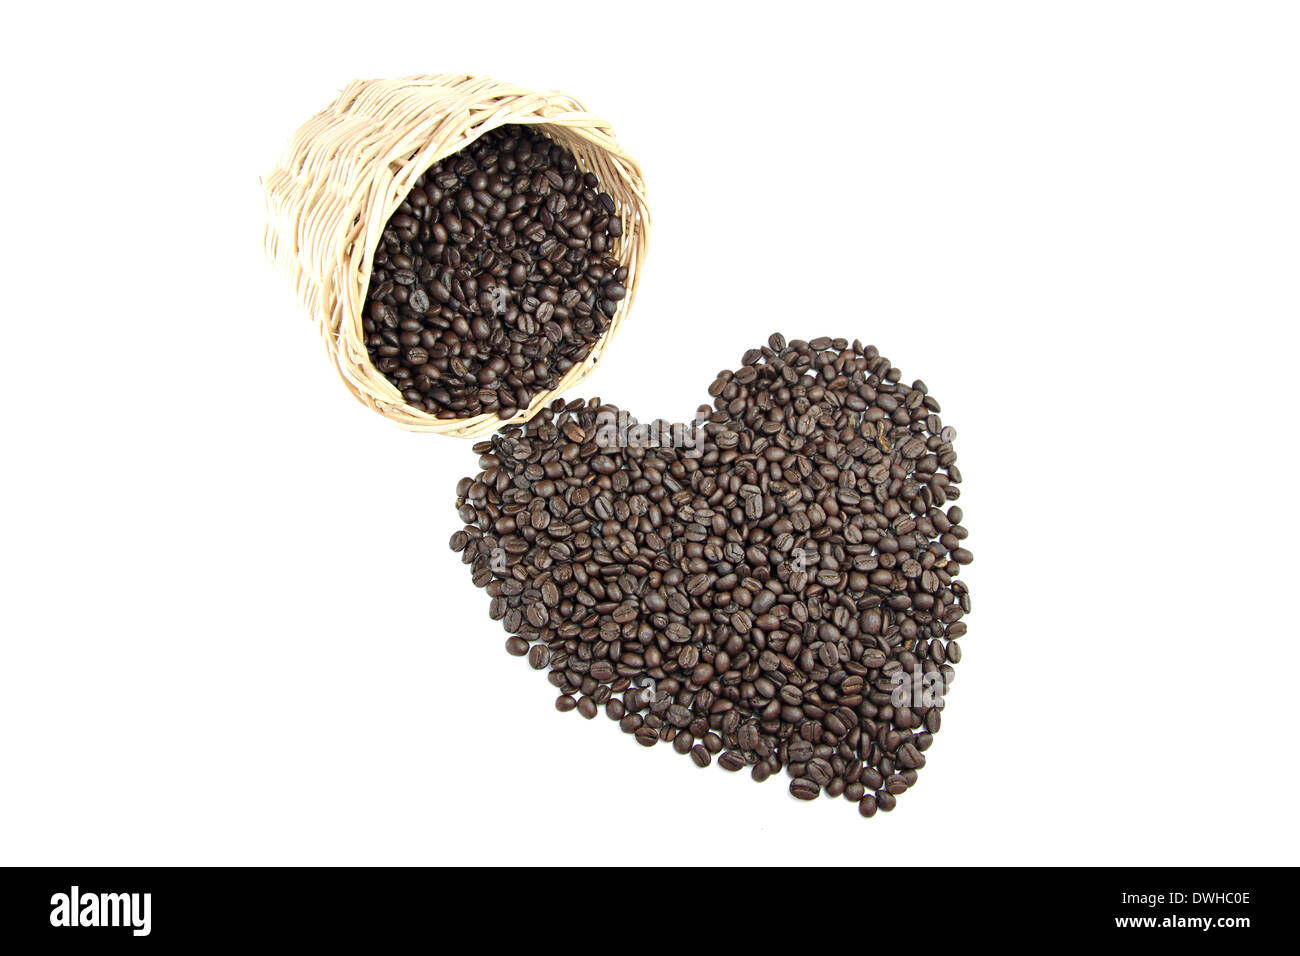 Roasted coffee beans that is shaped like heart on white background. Stock Photo